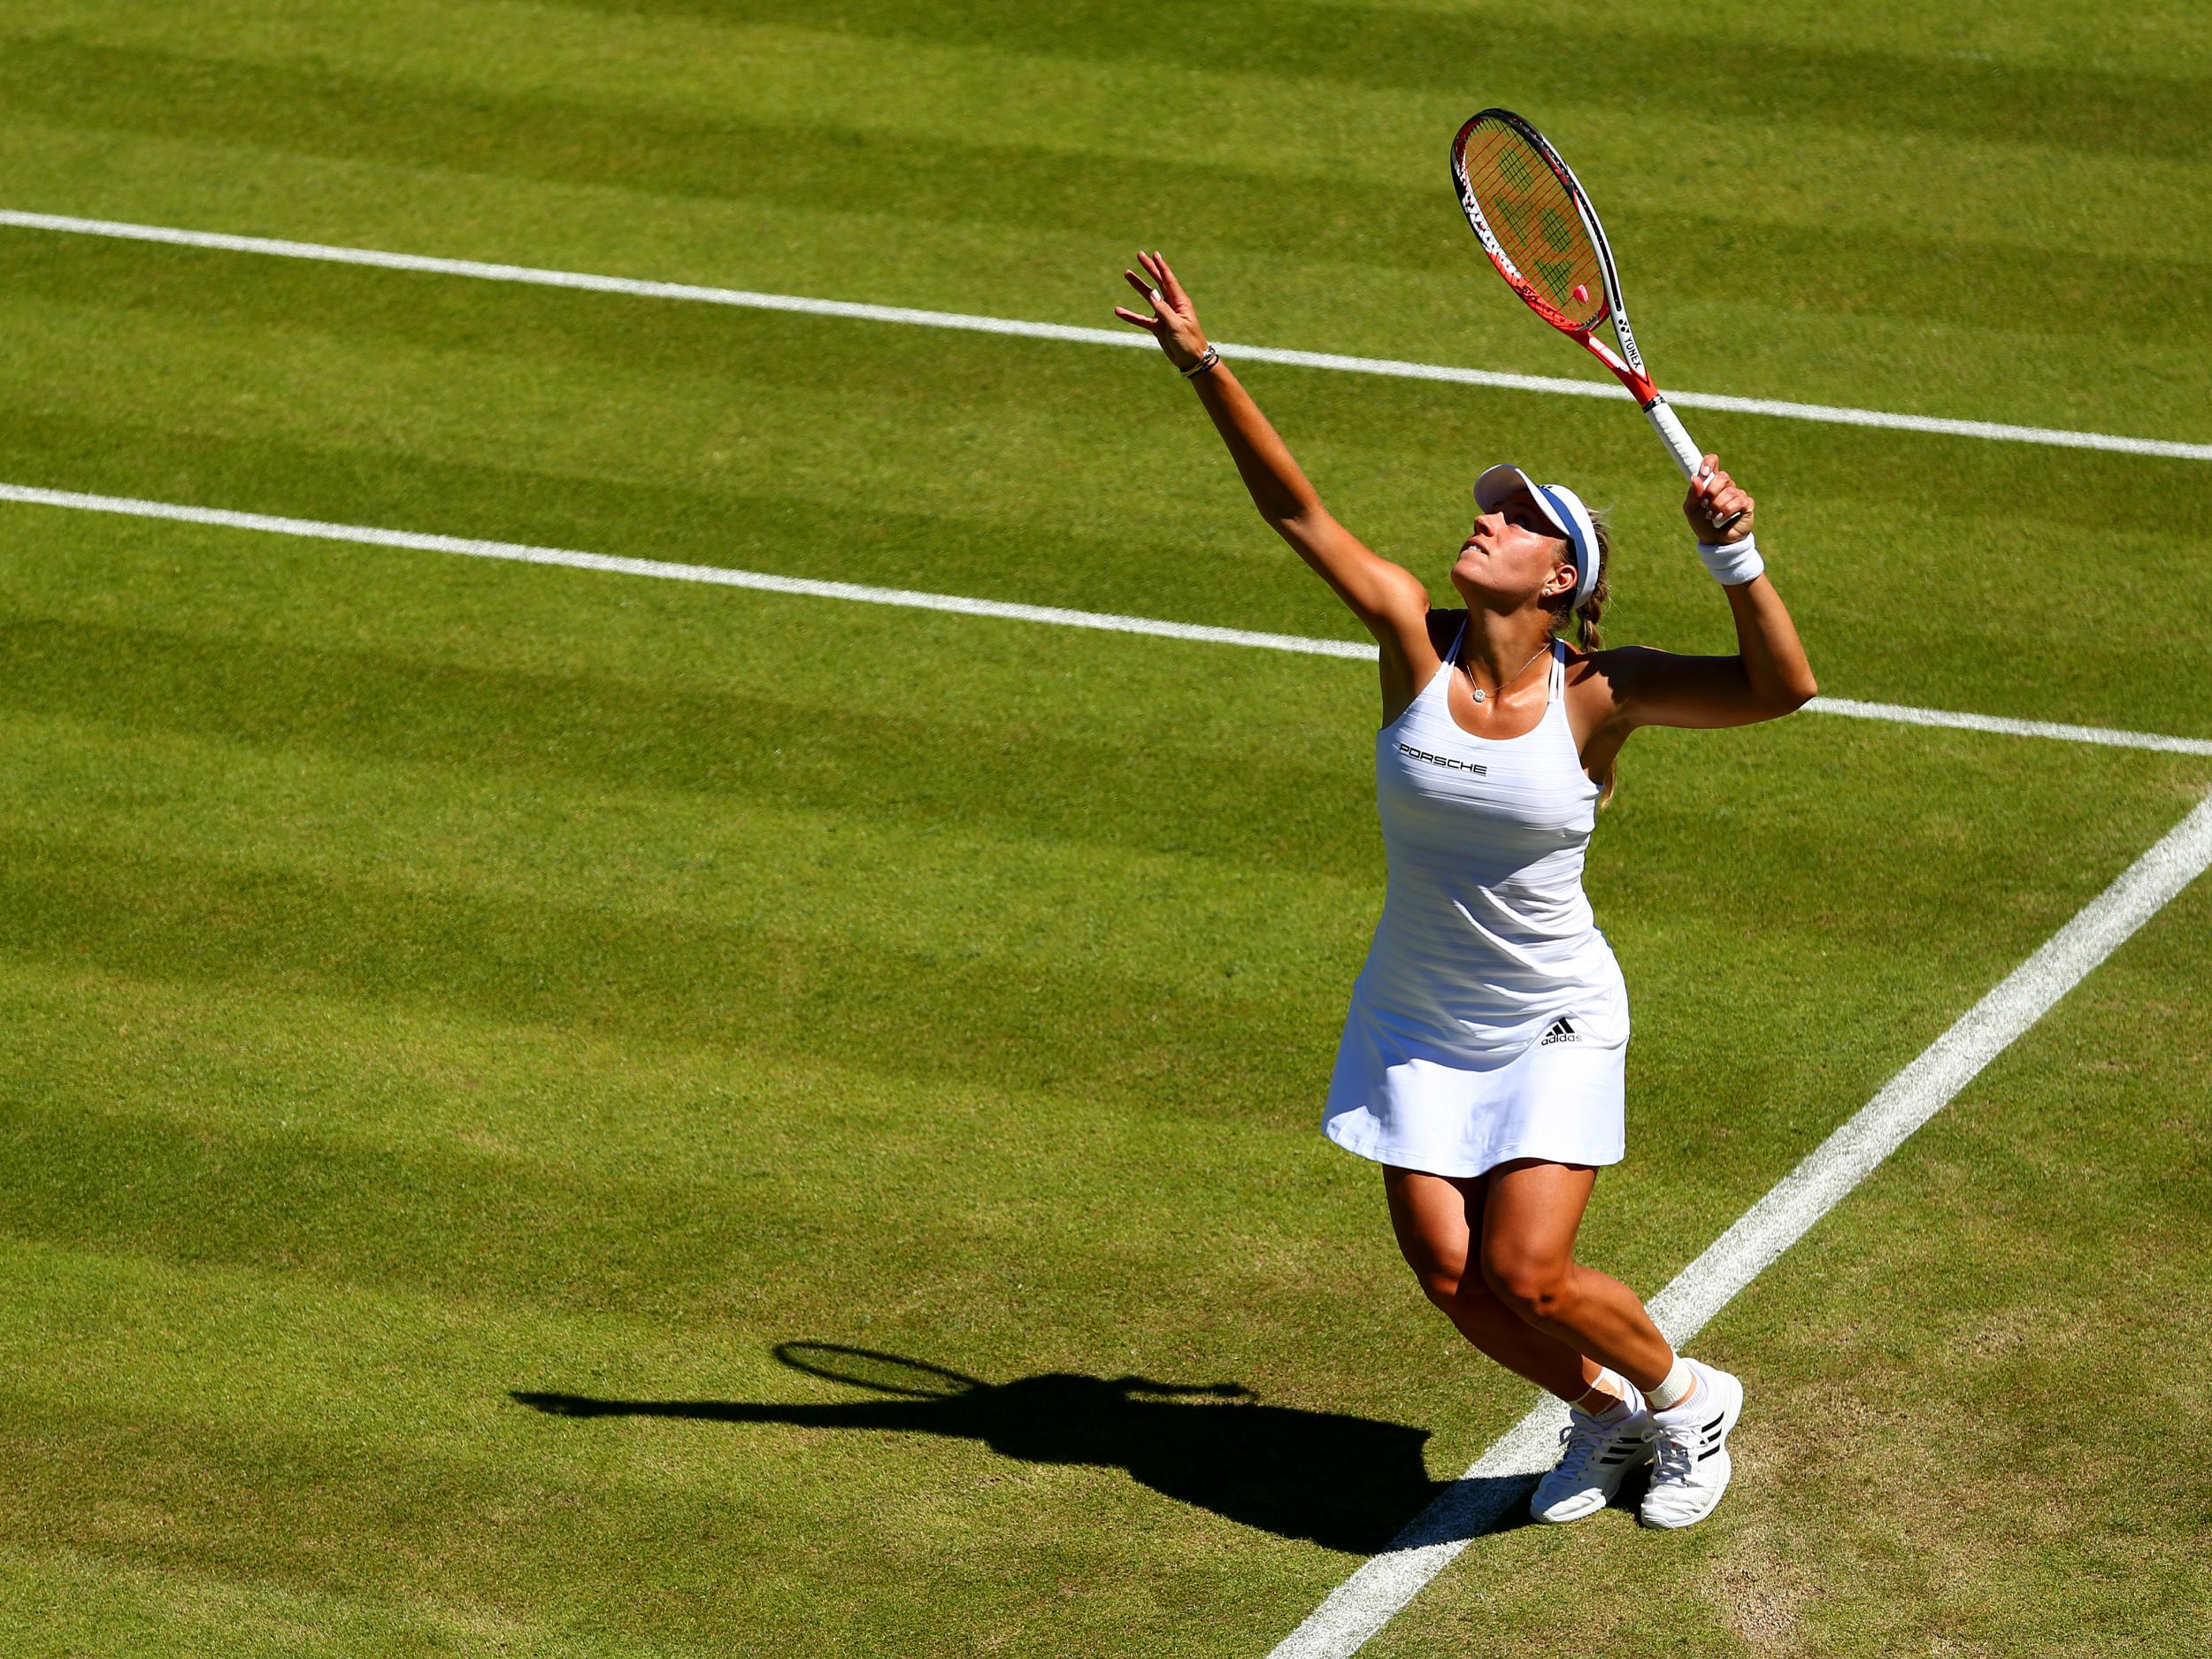 Kerber prefers the grass to the clay